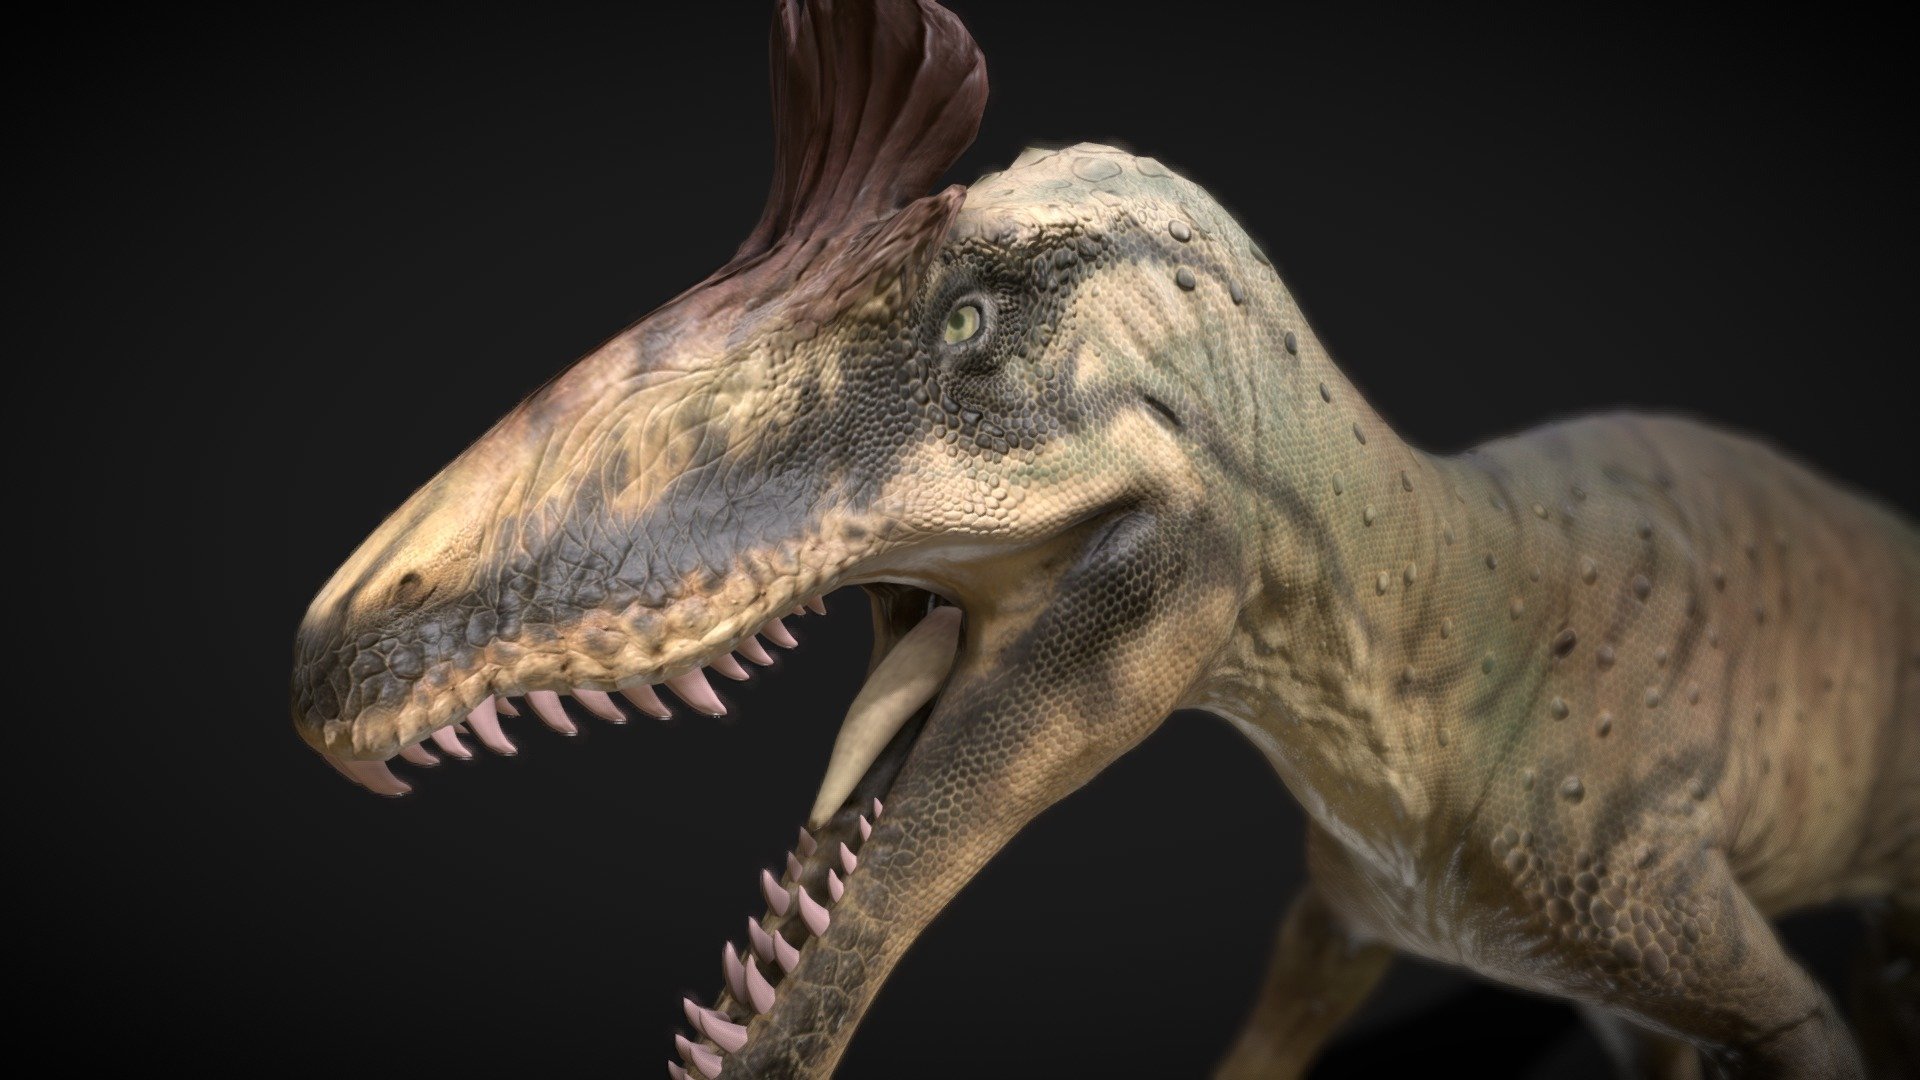 Cryolophosaurus, a striking theropod dinosaur from the Early Jurassic, strides into the prehistoric scene with its distinctive head crest and formidable presence. Discovered in Antarctica, this carnivorous dinosaur adds a touch of intrigue to the southern polar regions.

With a name meaning &ldquo;frozen crested lizard,